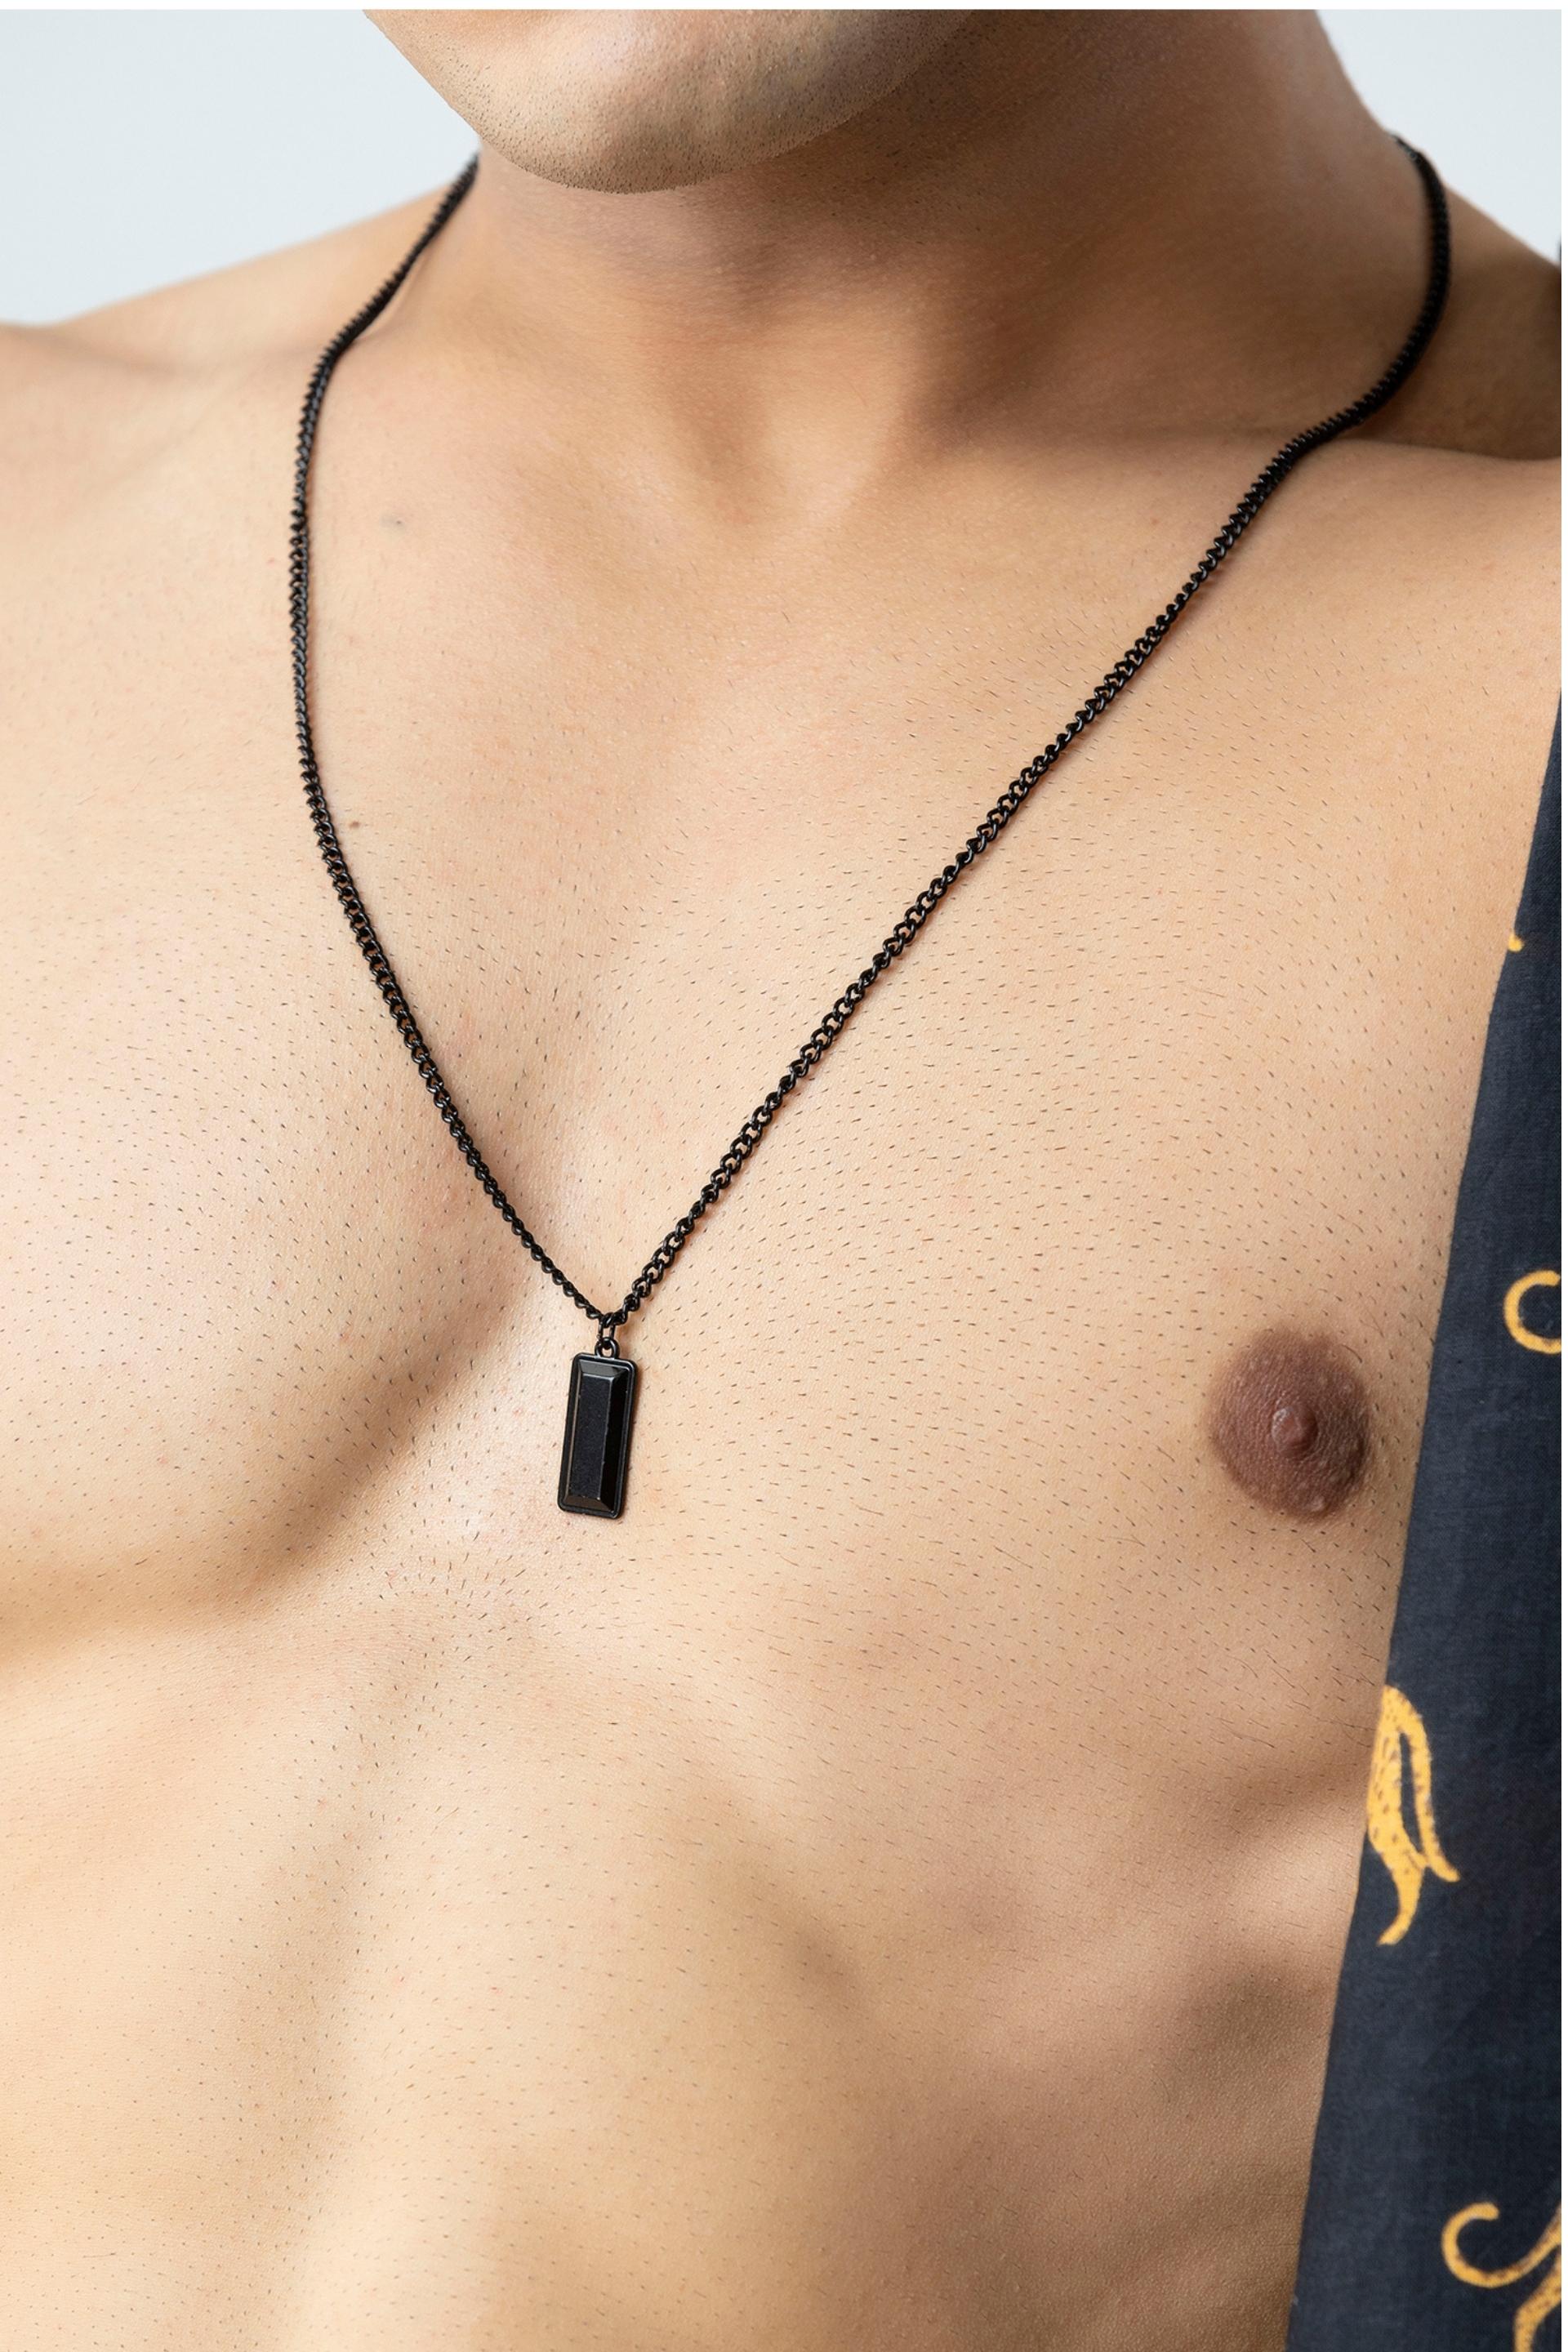 Black Ring Necklace Jewelry for Men / Coated Stainless Steel Men's Black  Ring on Black Rope Chain / Commitment Necklace / Promise Necklace - Etsy |  Mens jewelry, Cool rings for men, Men's necklace